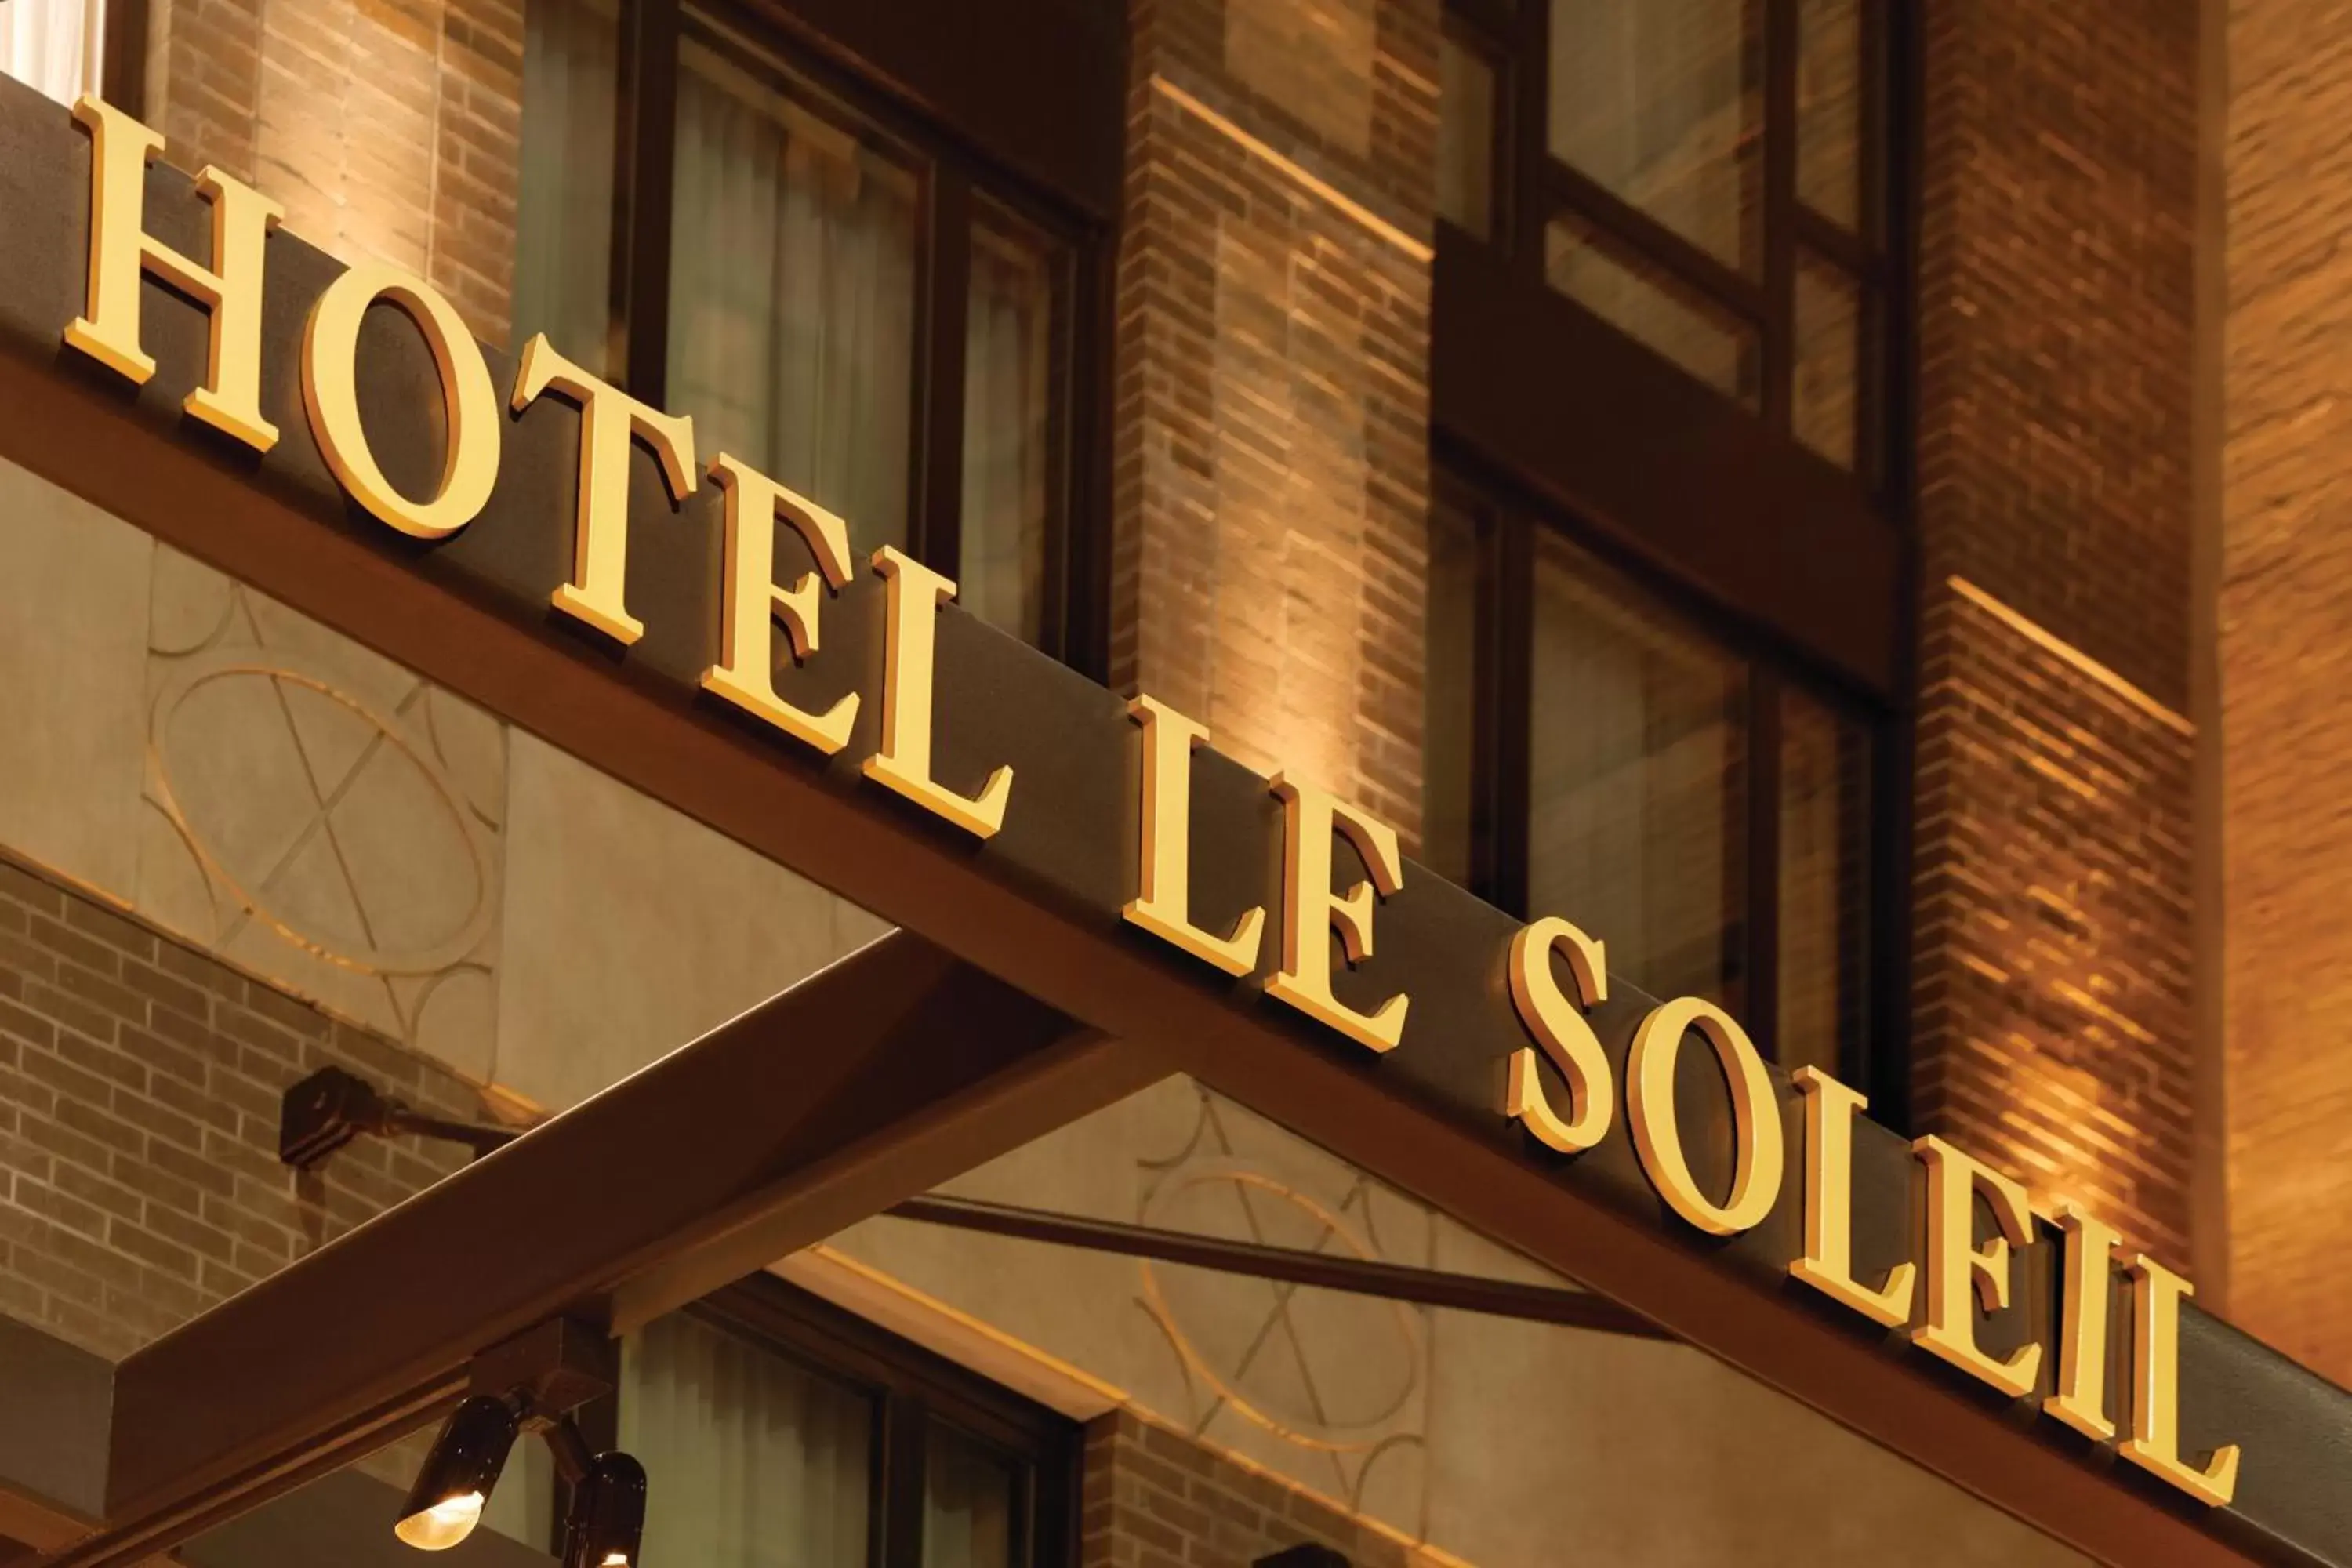 Property logo or sign, Logo/Certificate/Sign/Award in Executive Hotel Le Soleil New York